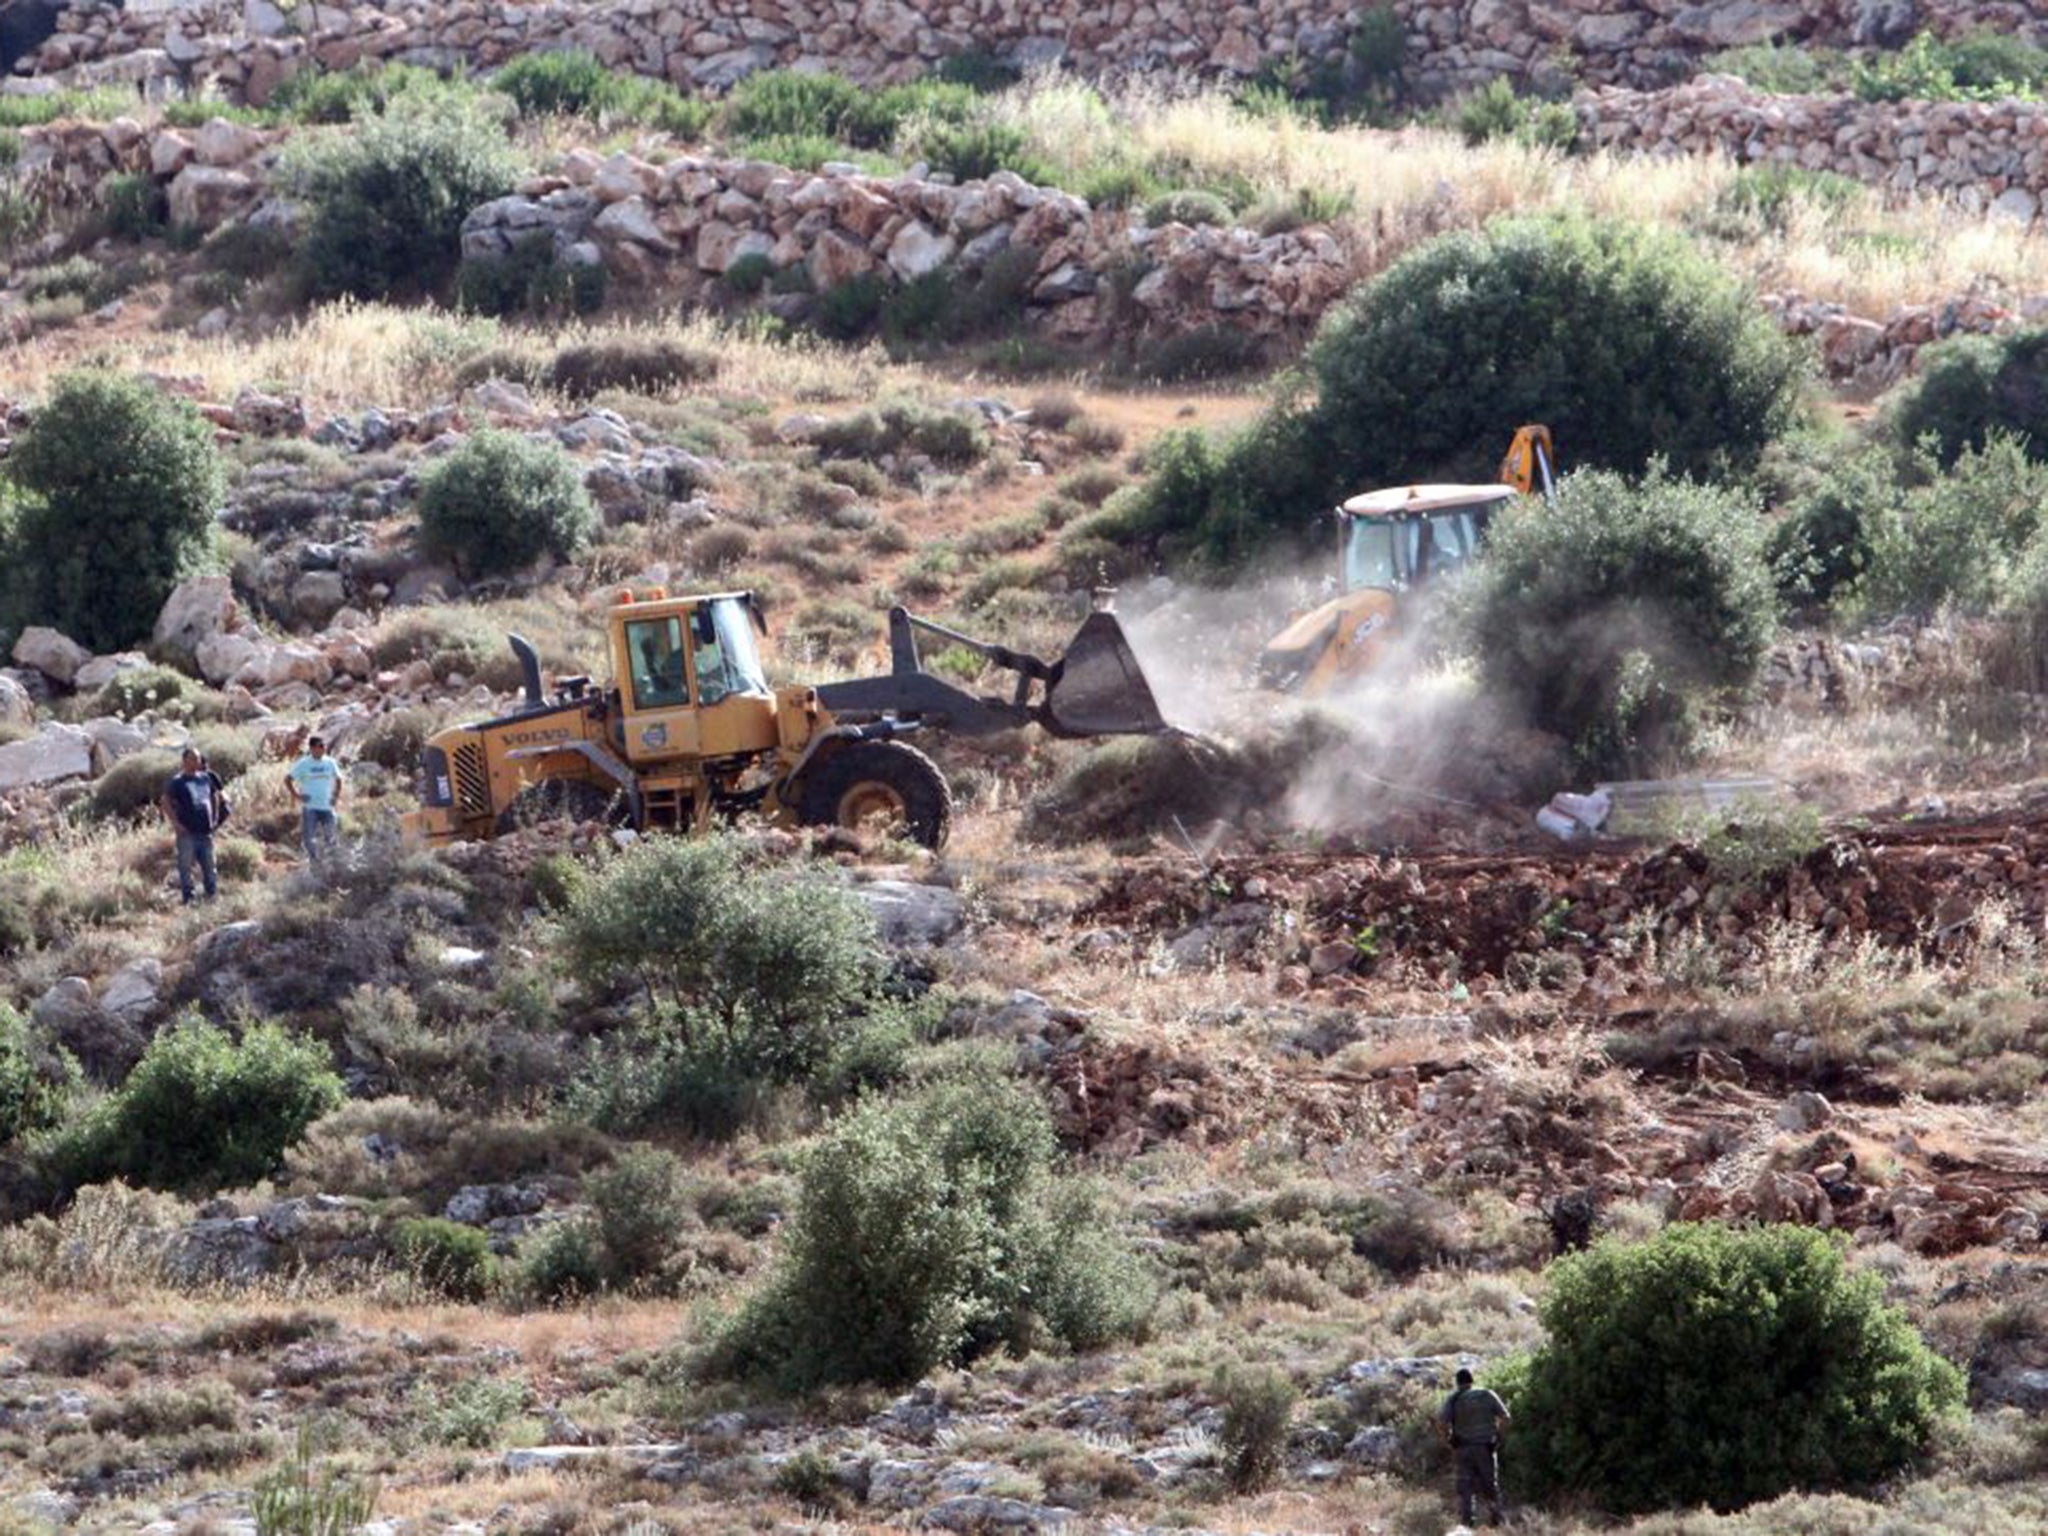 Bulldozers clear land for a new settlement in the West Bank village of Wadi Fukin last week